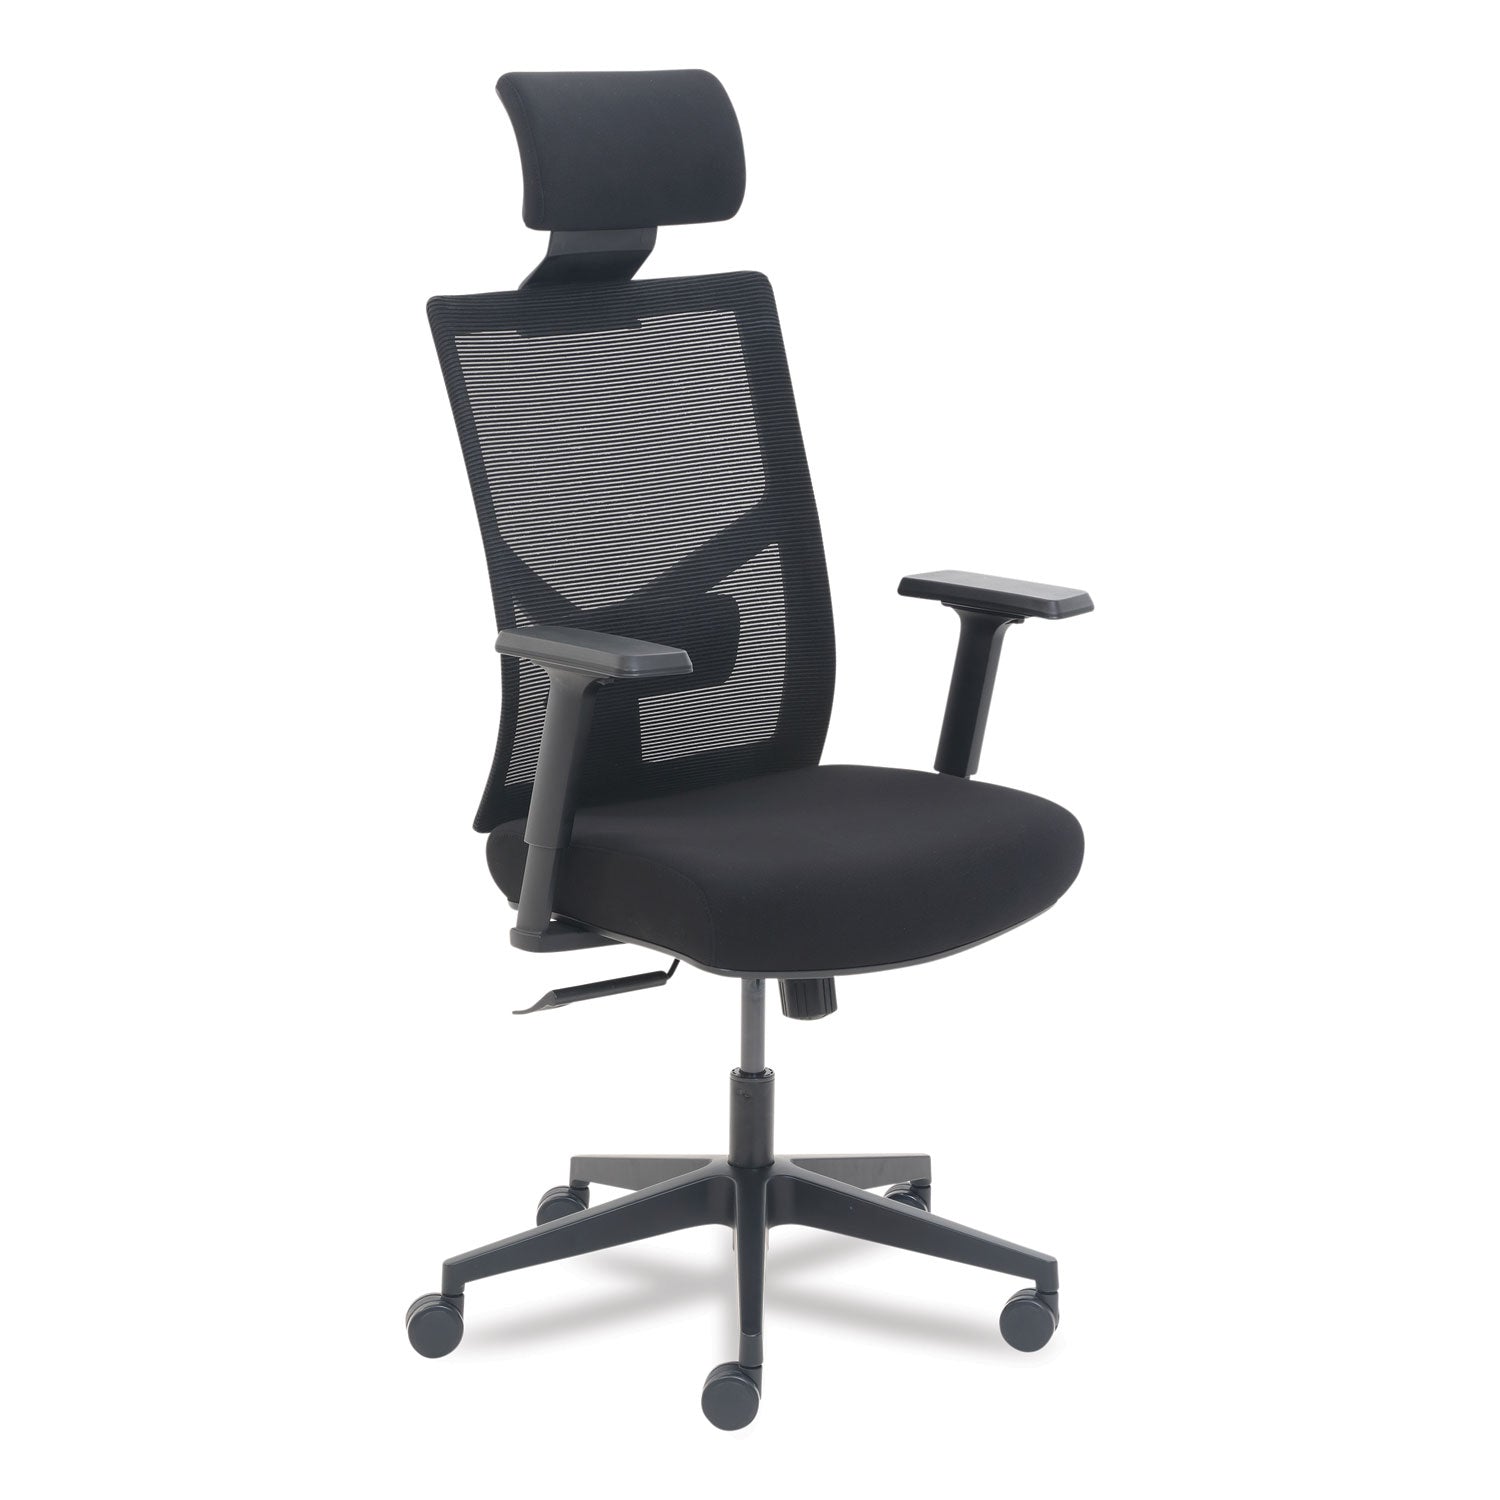 mesh-back-molded-foam-task-chair-supports-up-to-275-lb-black-seat-back_lzb60021 - 1